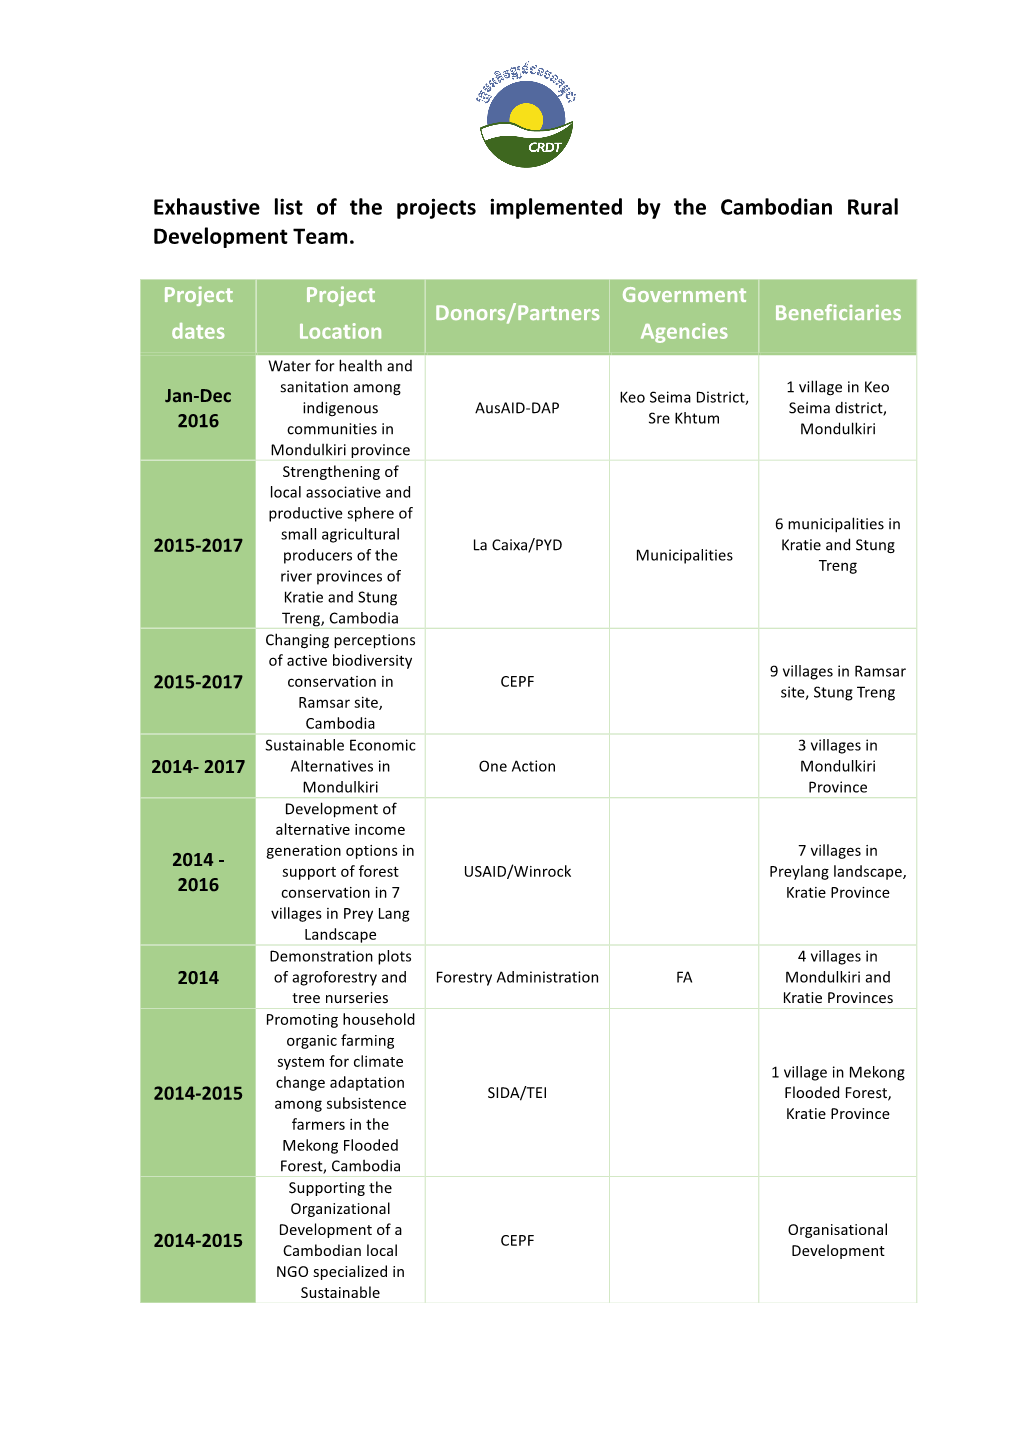 Exhaustive List of the Projects Implemented by the Cambodian Rural Development Team